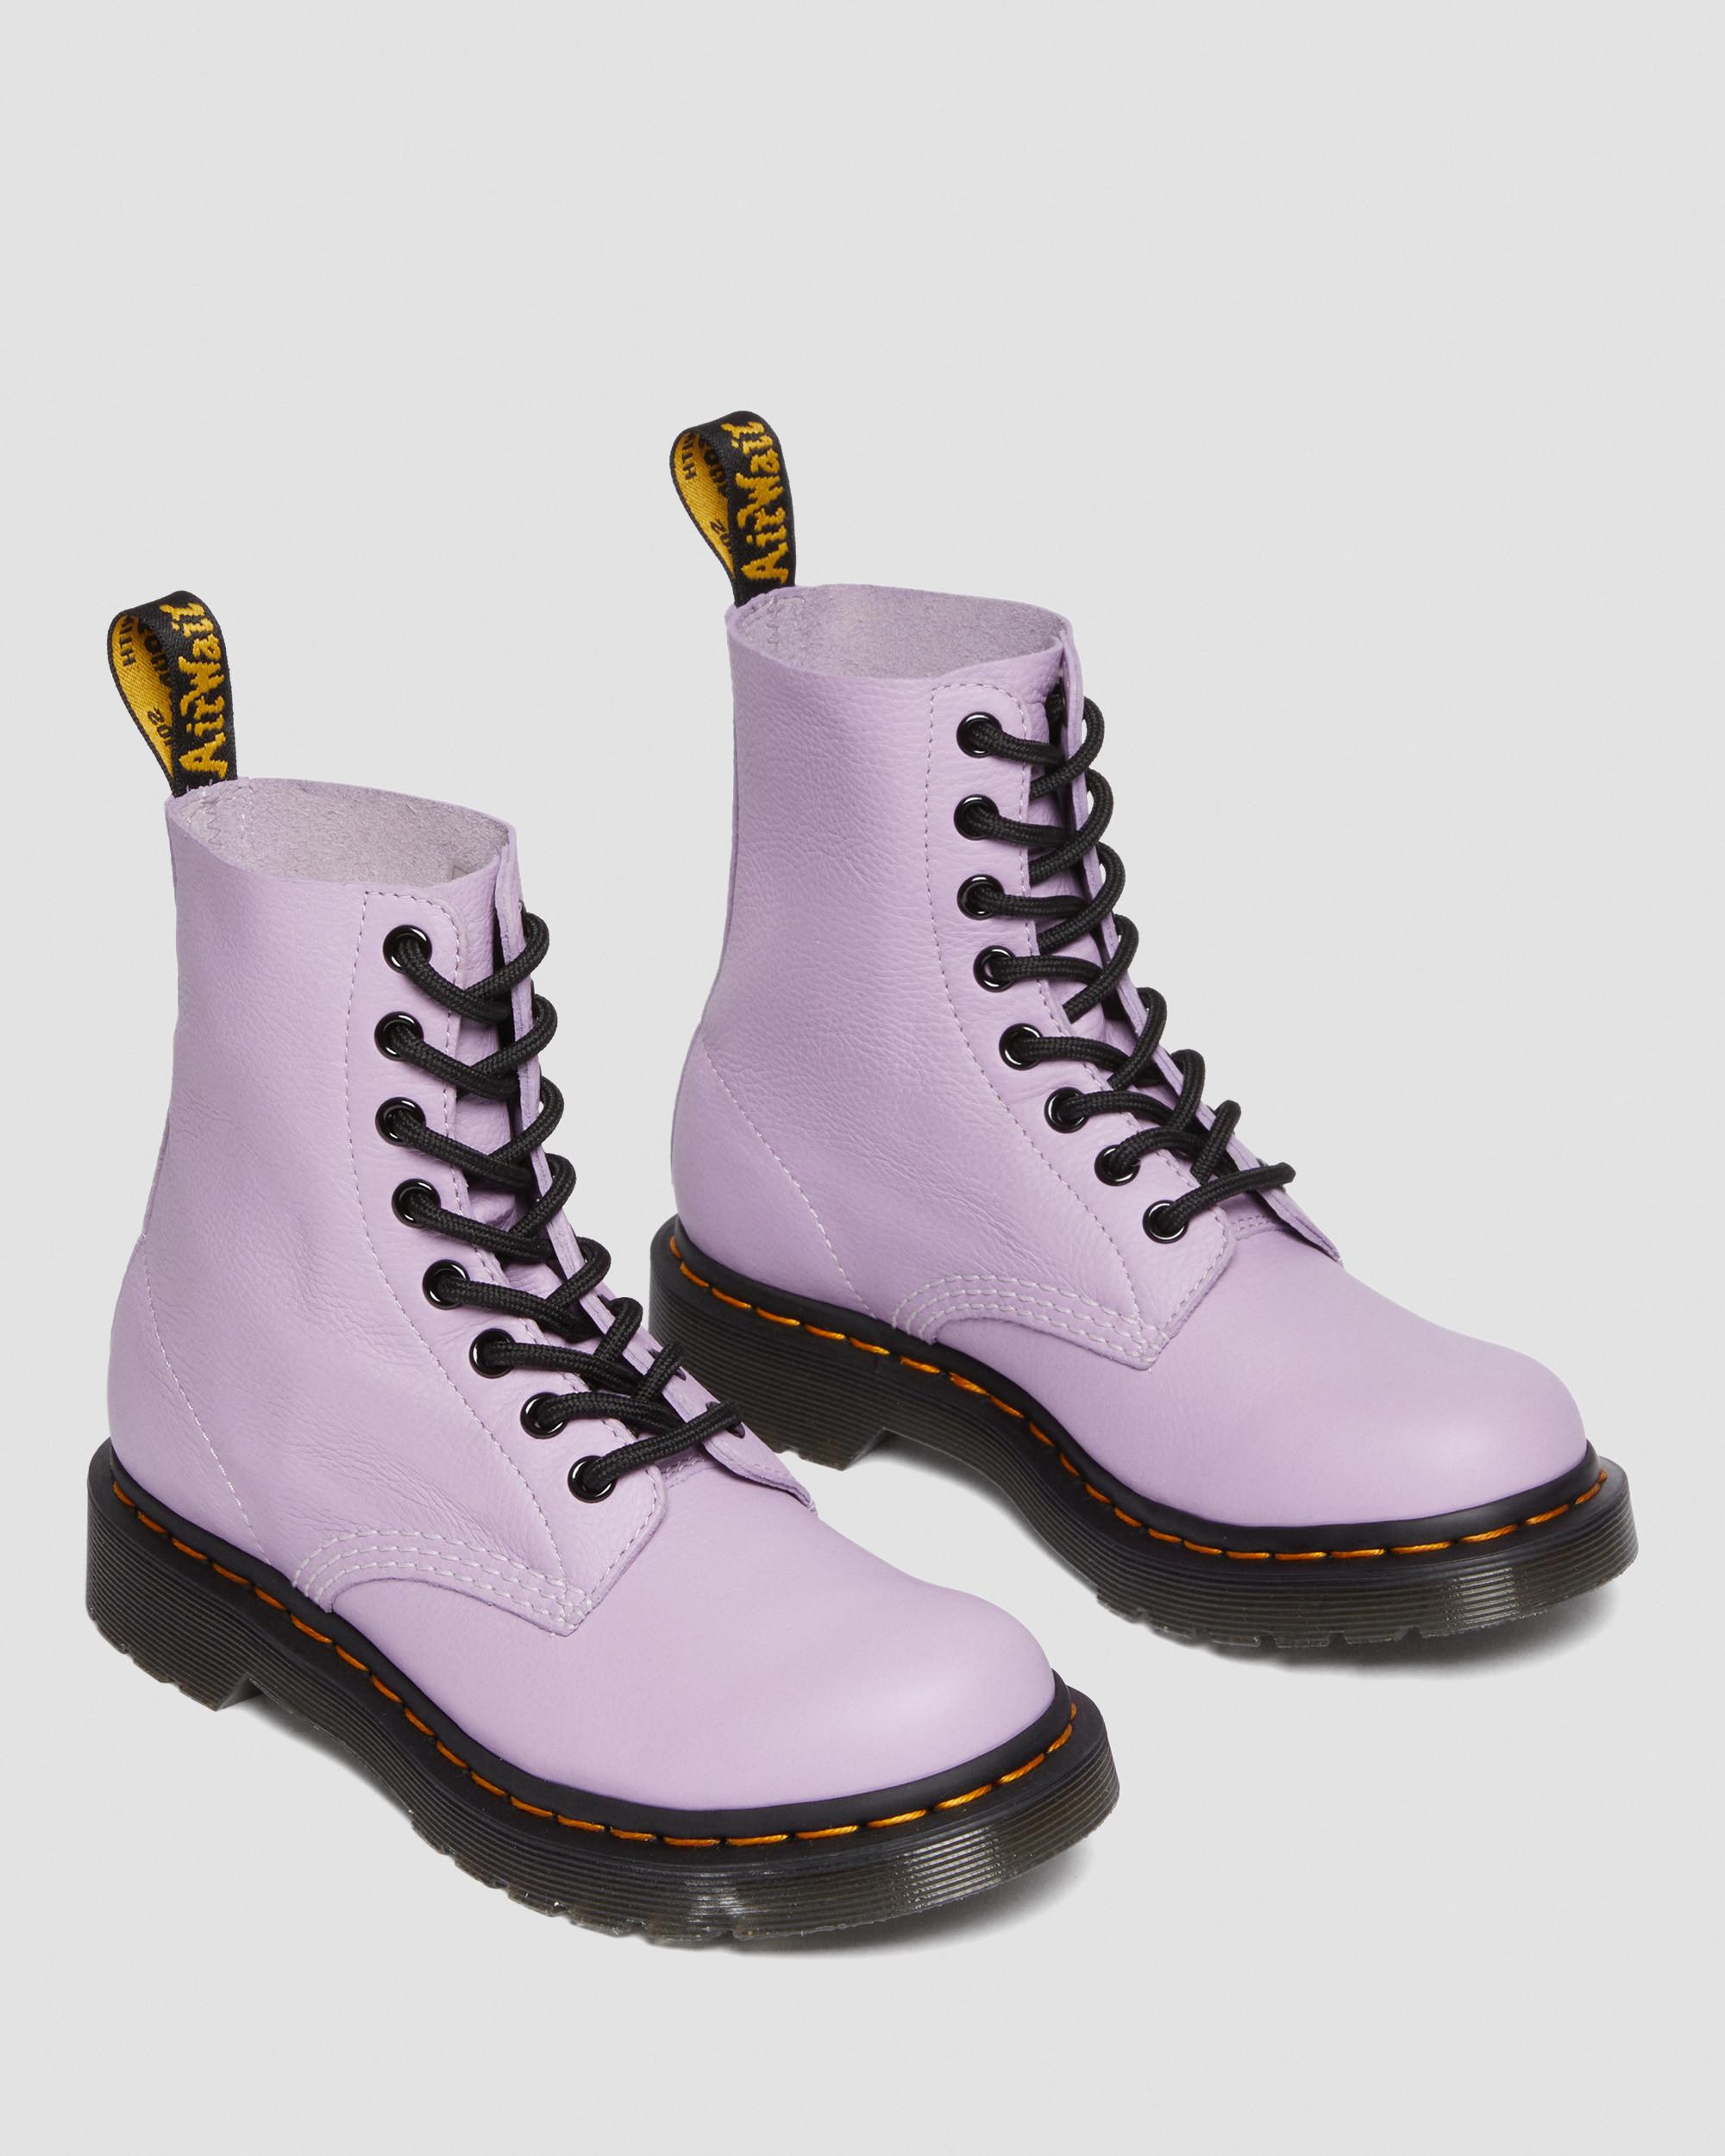 in Boots Up Pascal Black 1460 Women\'s Dr. Eyelet | Martens Lace Lilac